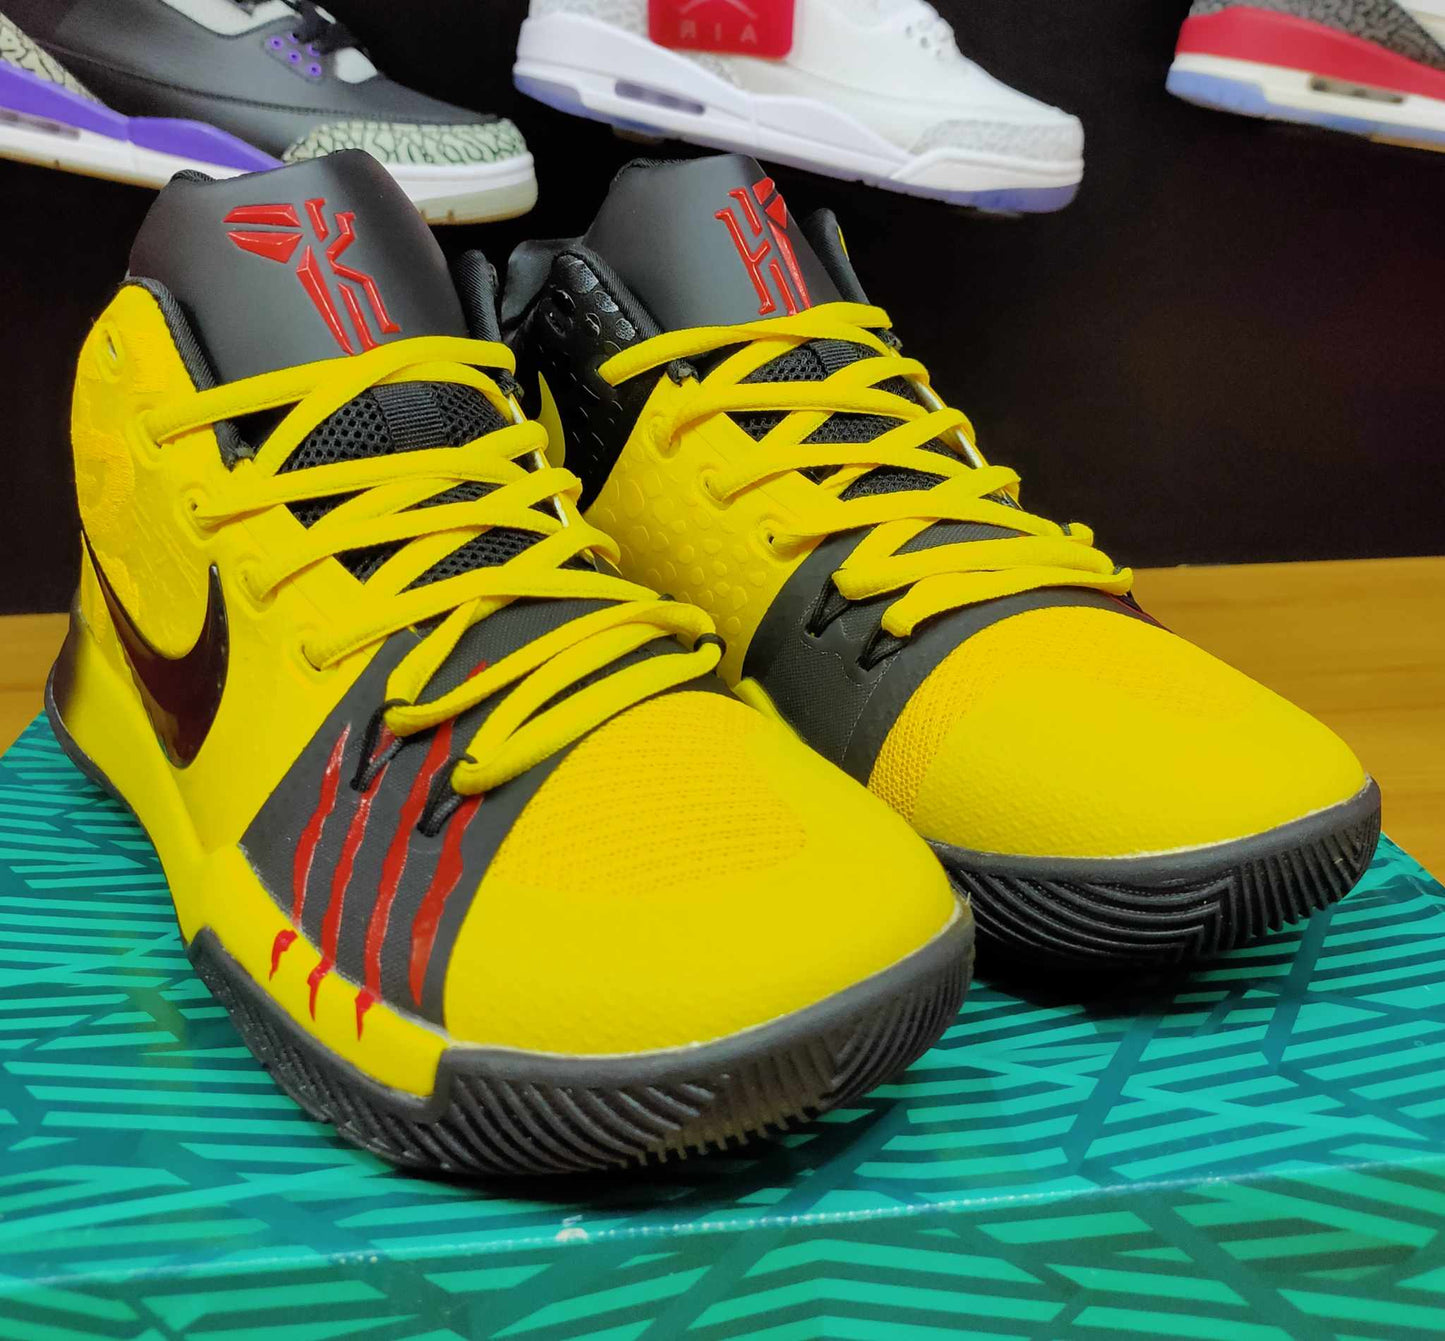 Kyrie3 "Mamba Mentality or Bruce Lee"